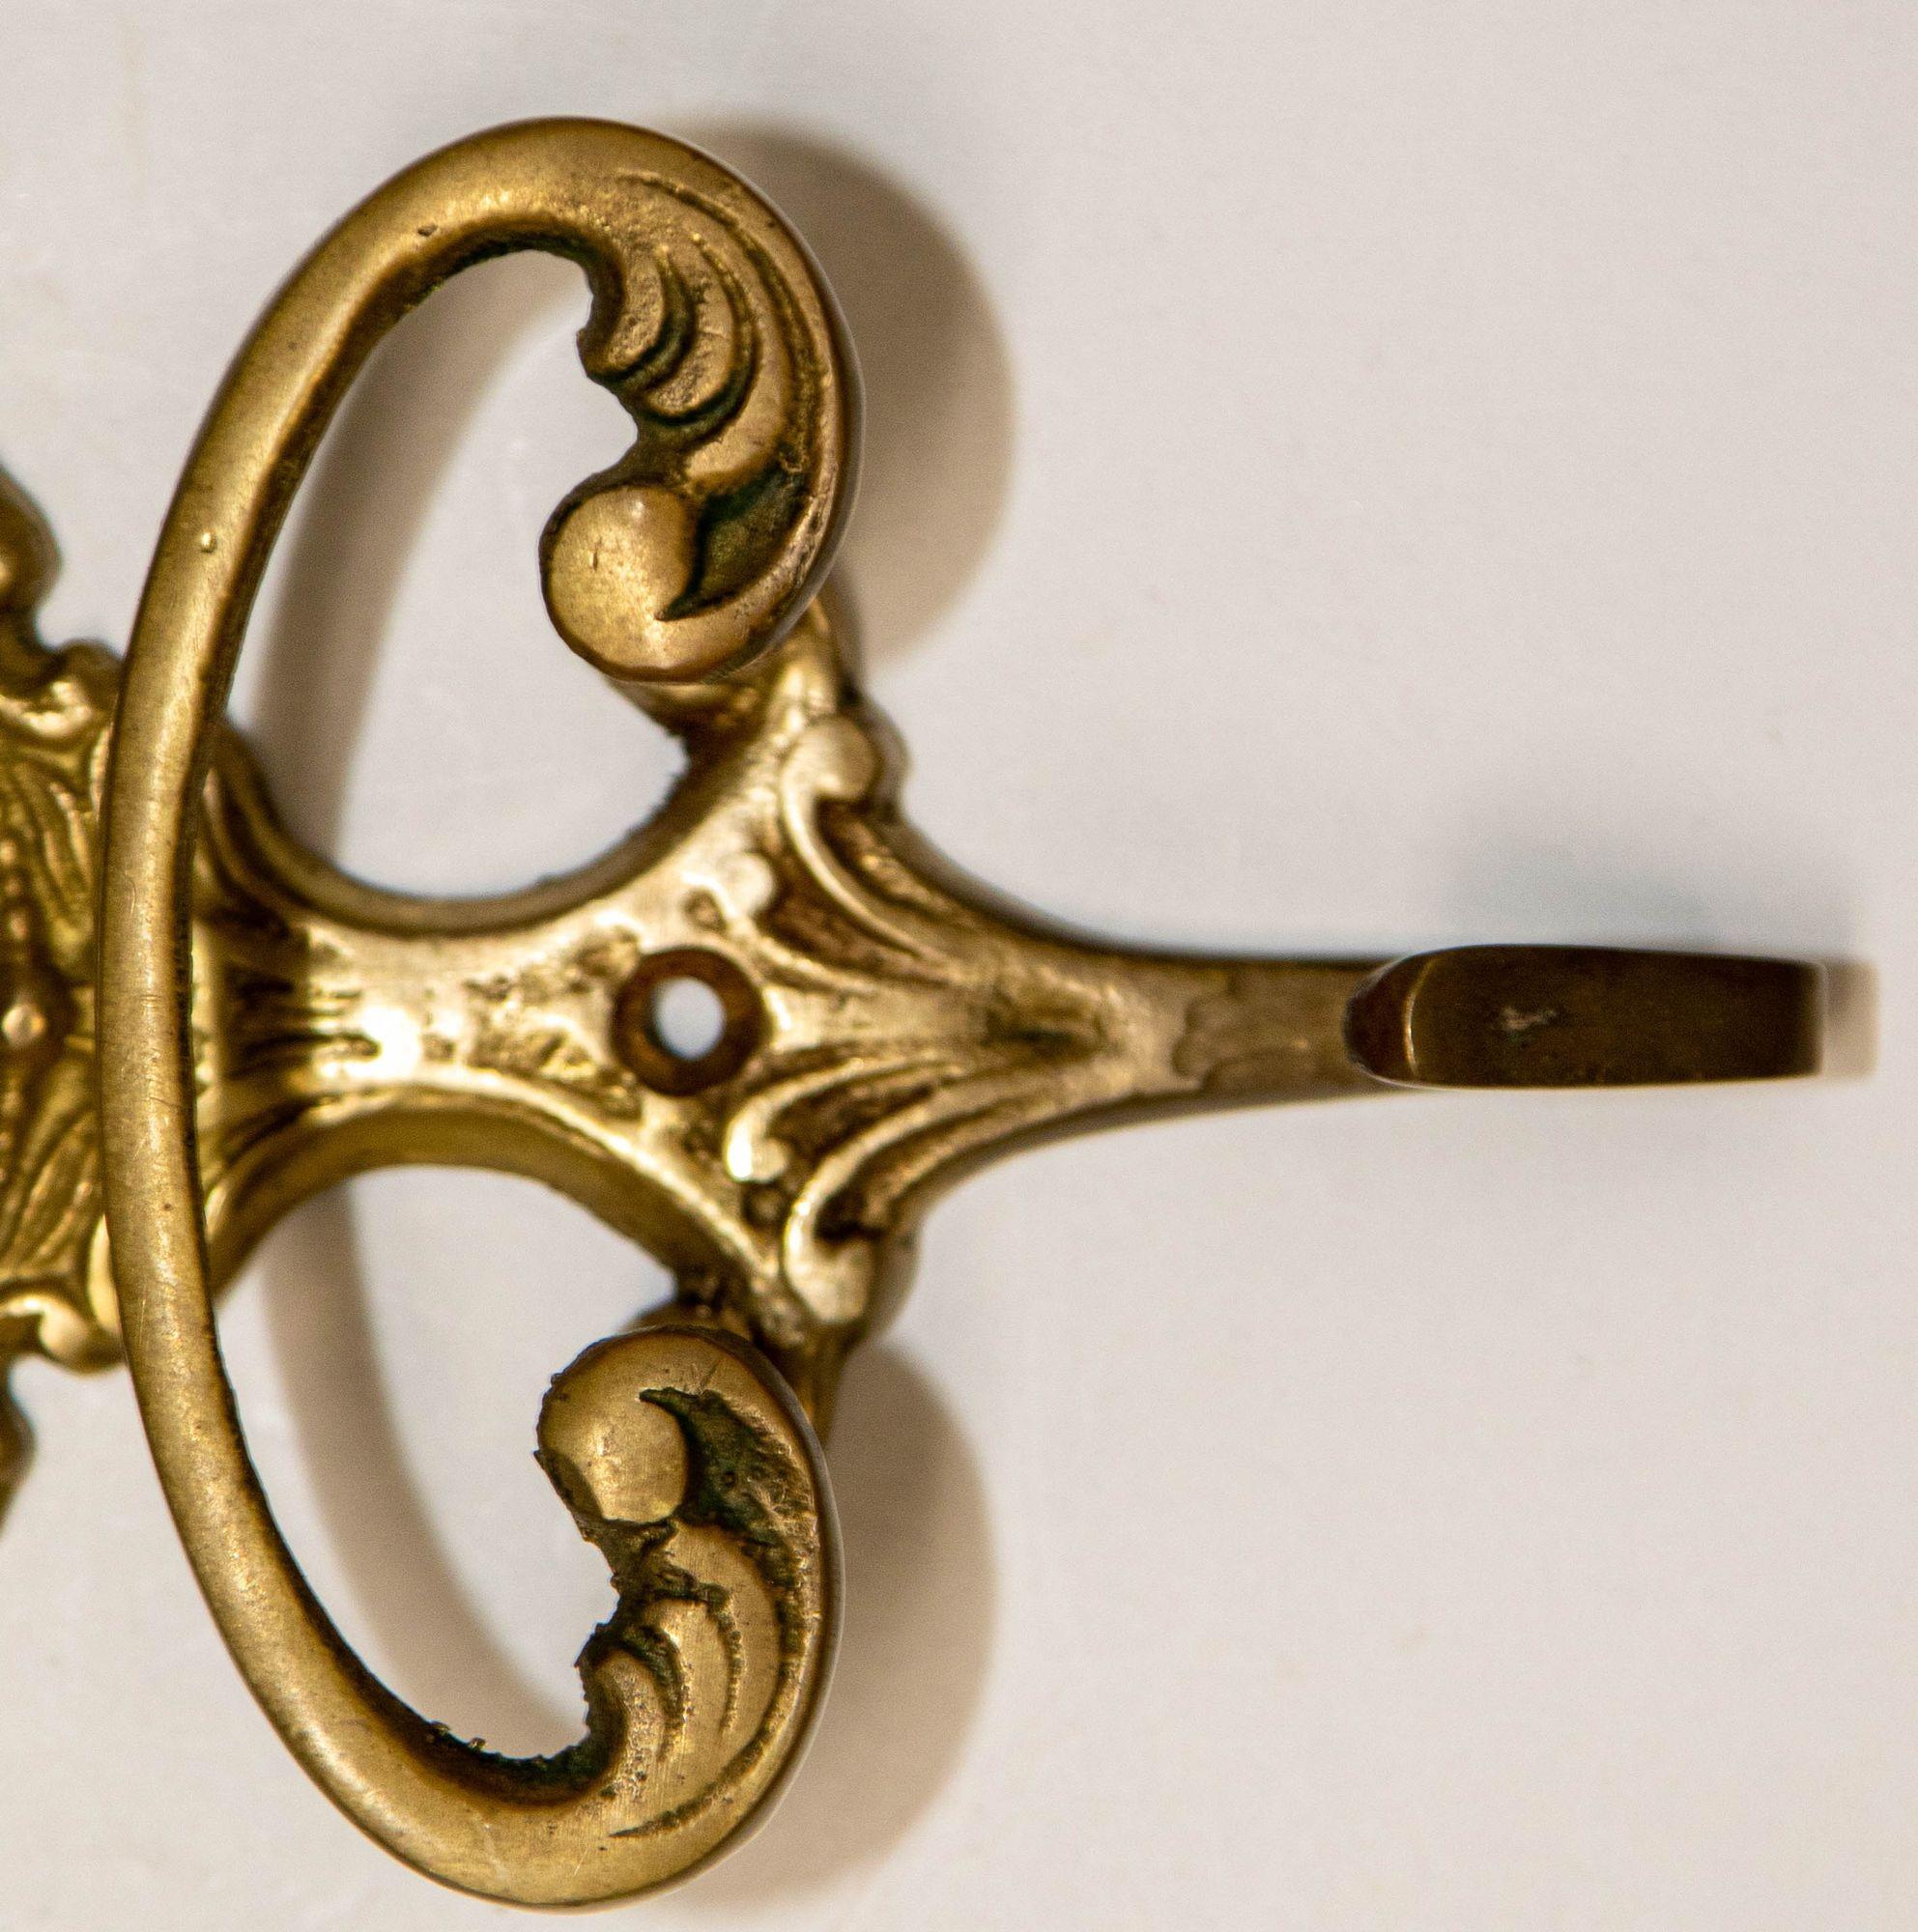 Architectural Italian Cast Brass Floral Wall Hook Decor Made in Italy 9